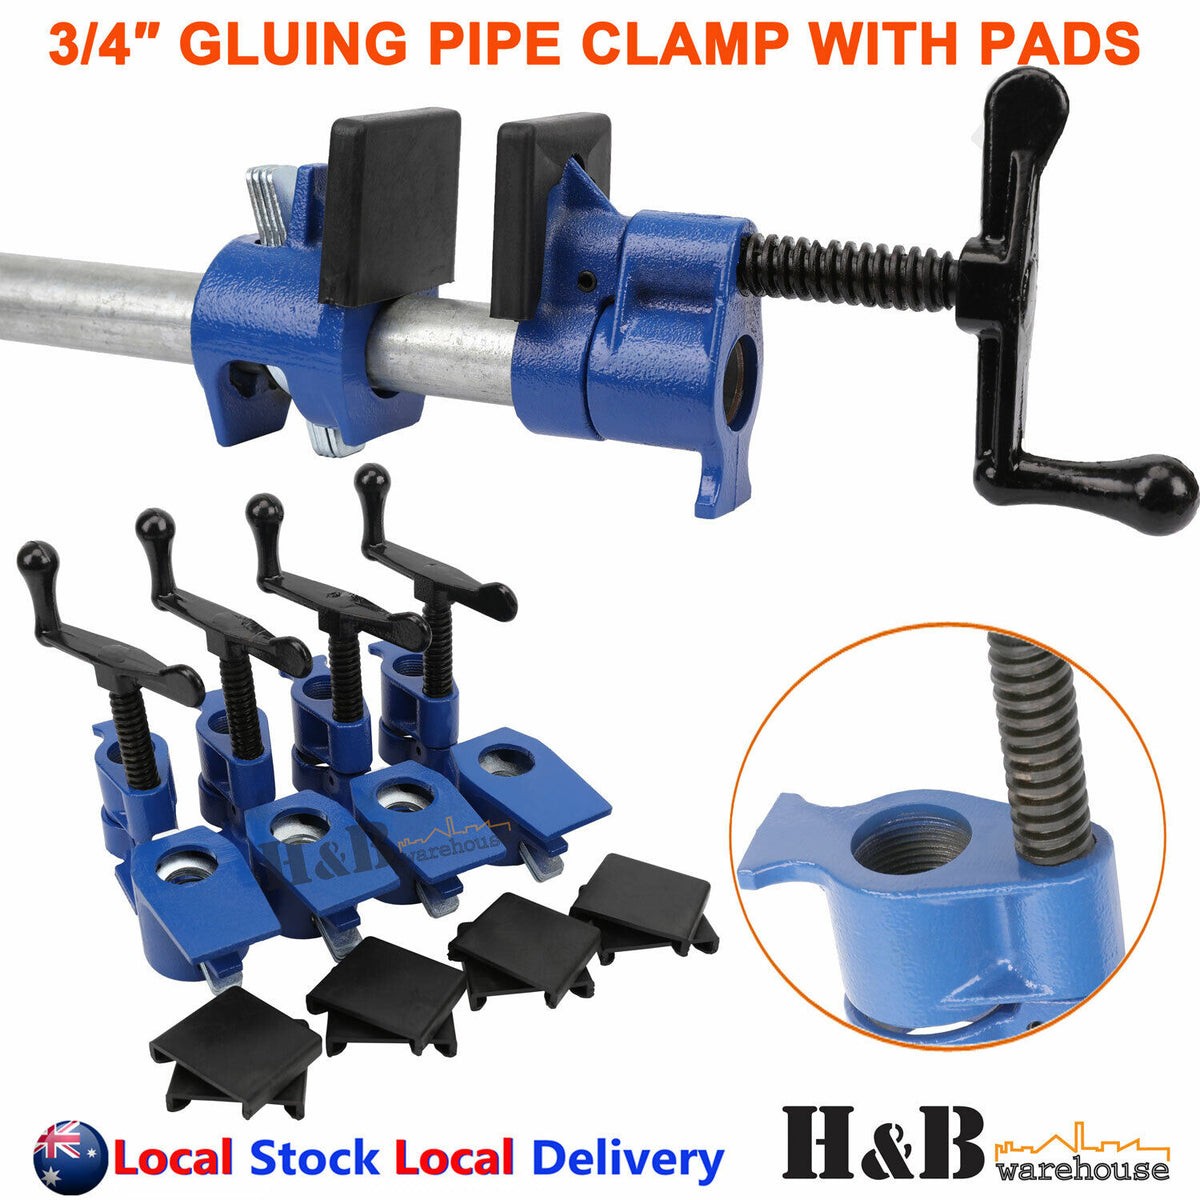 4 Pcs Heavy Duty 3/4" Gluing Pipe Clamp Vice Vise Tool Wide Protect Pads SALE!!!